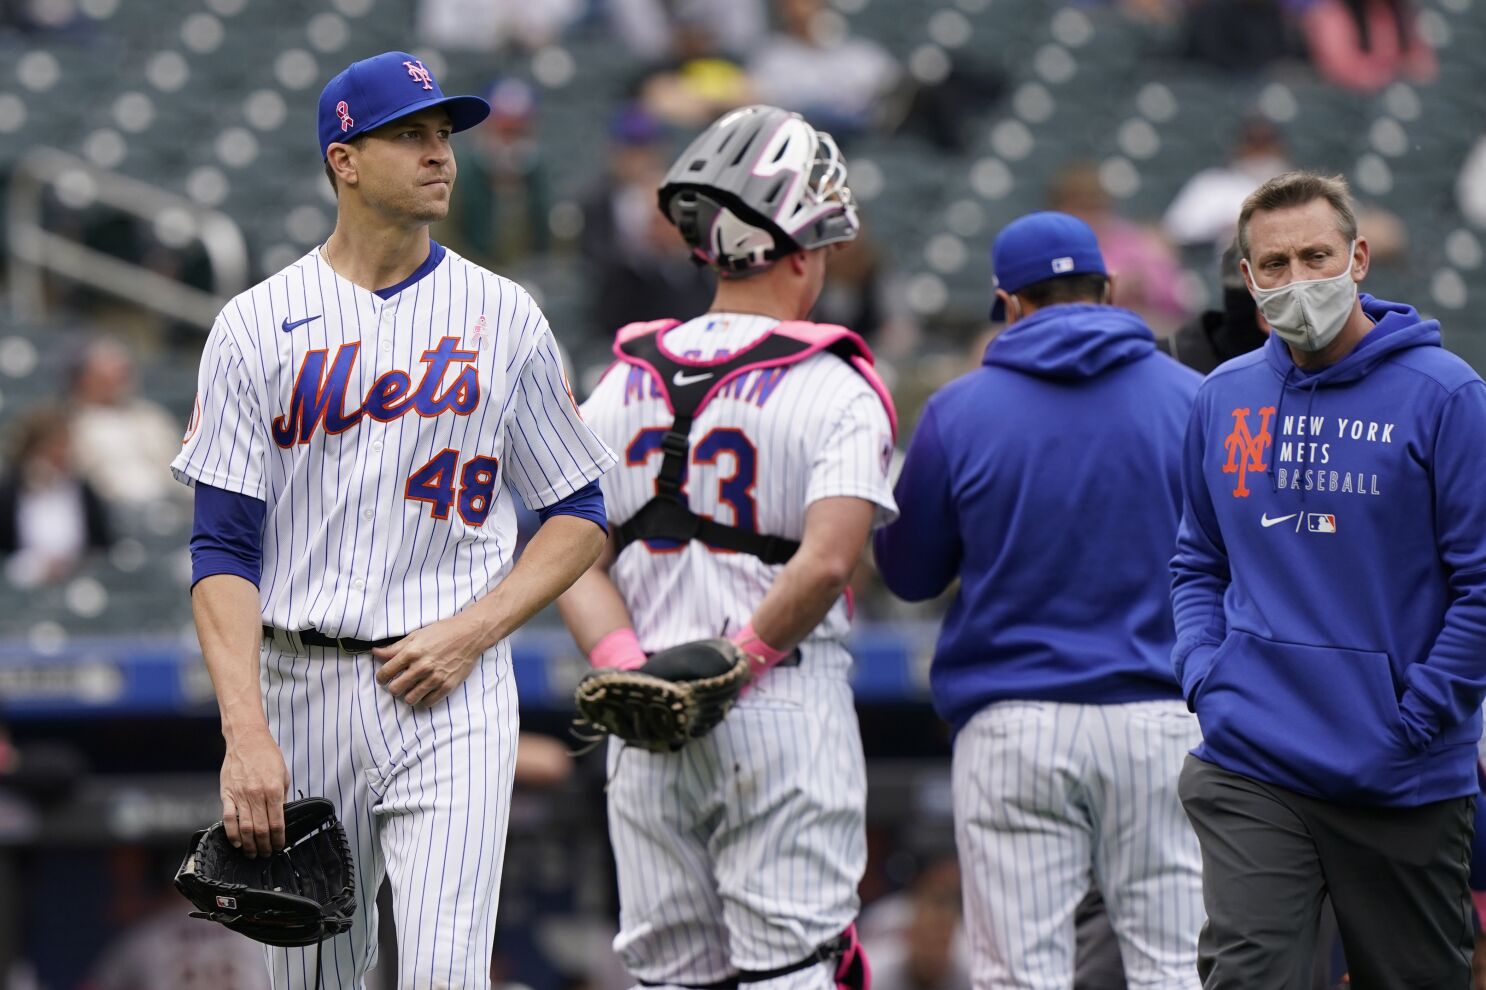 Mets' deGrom plays catch, studies mechanics amid side issue - The